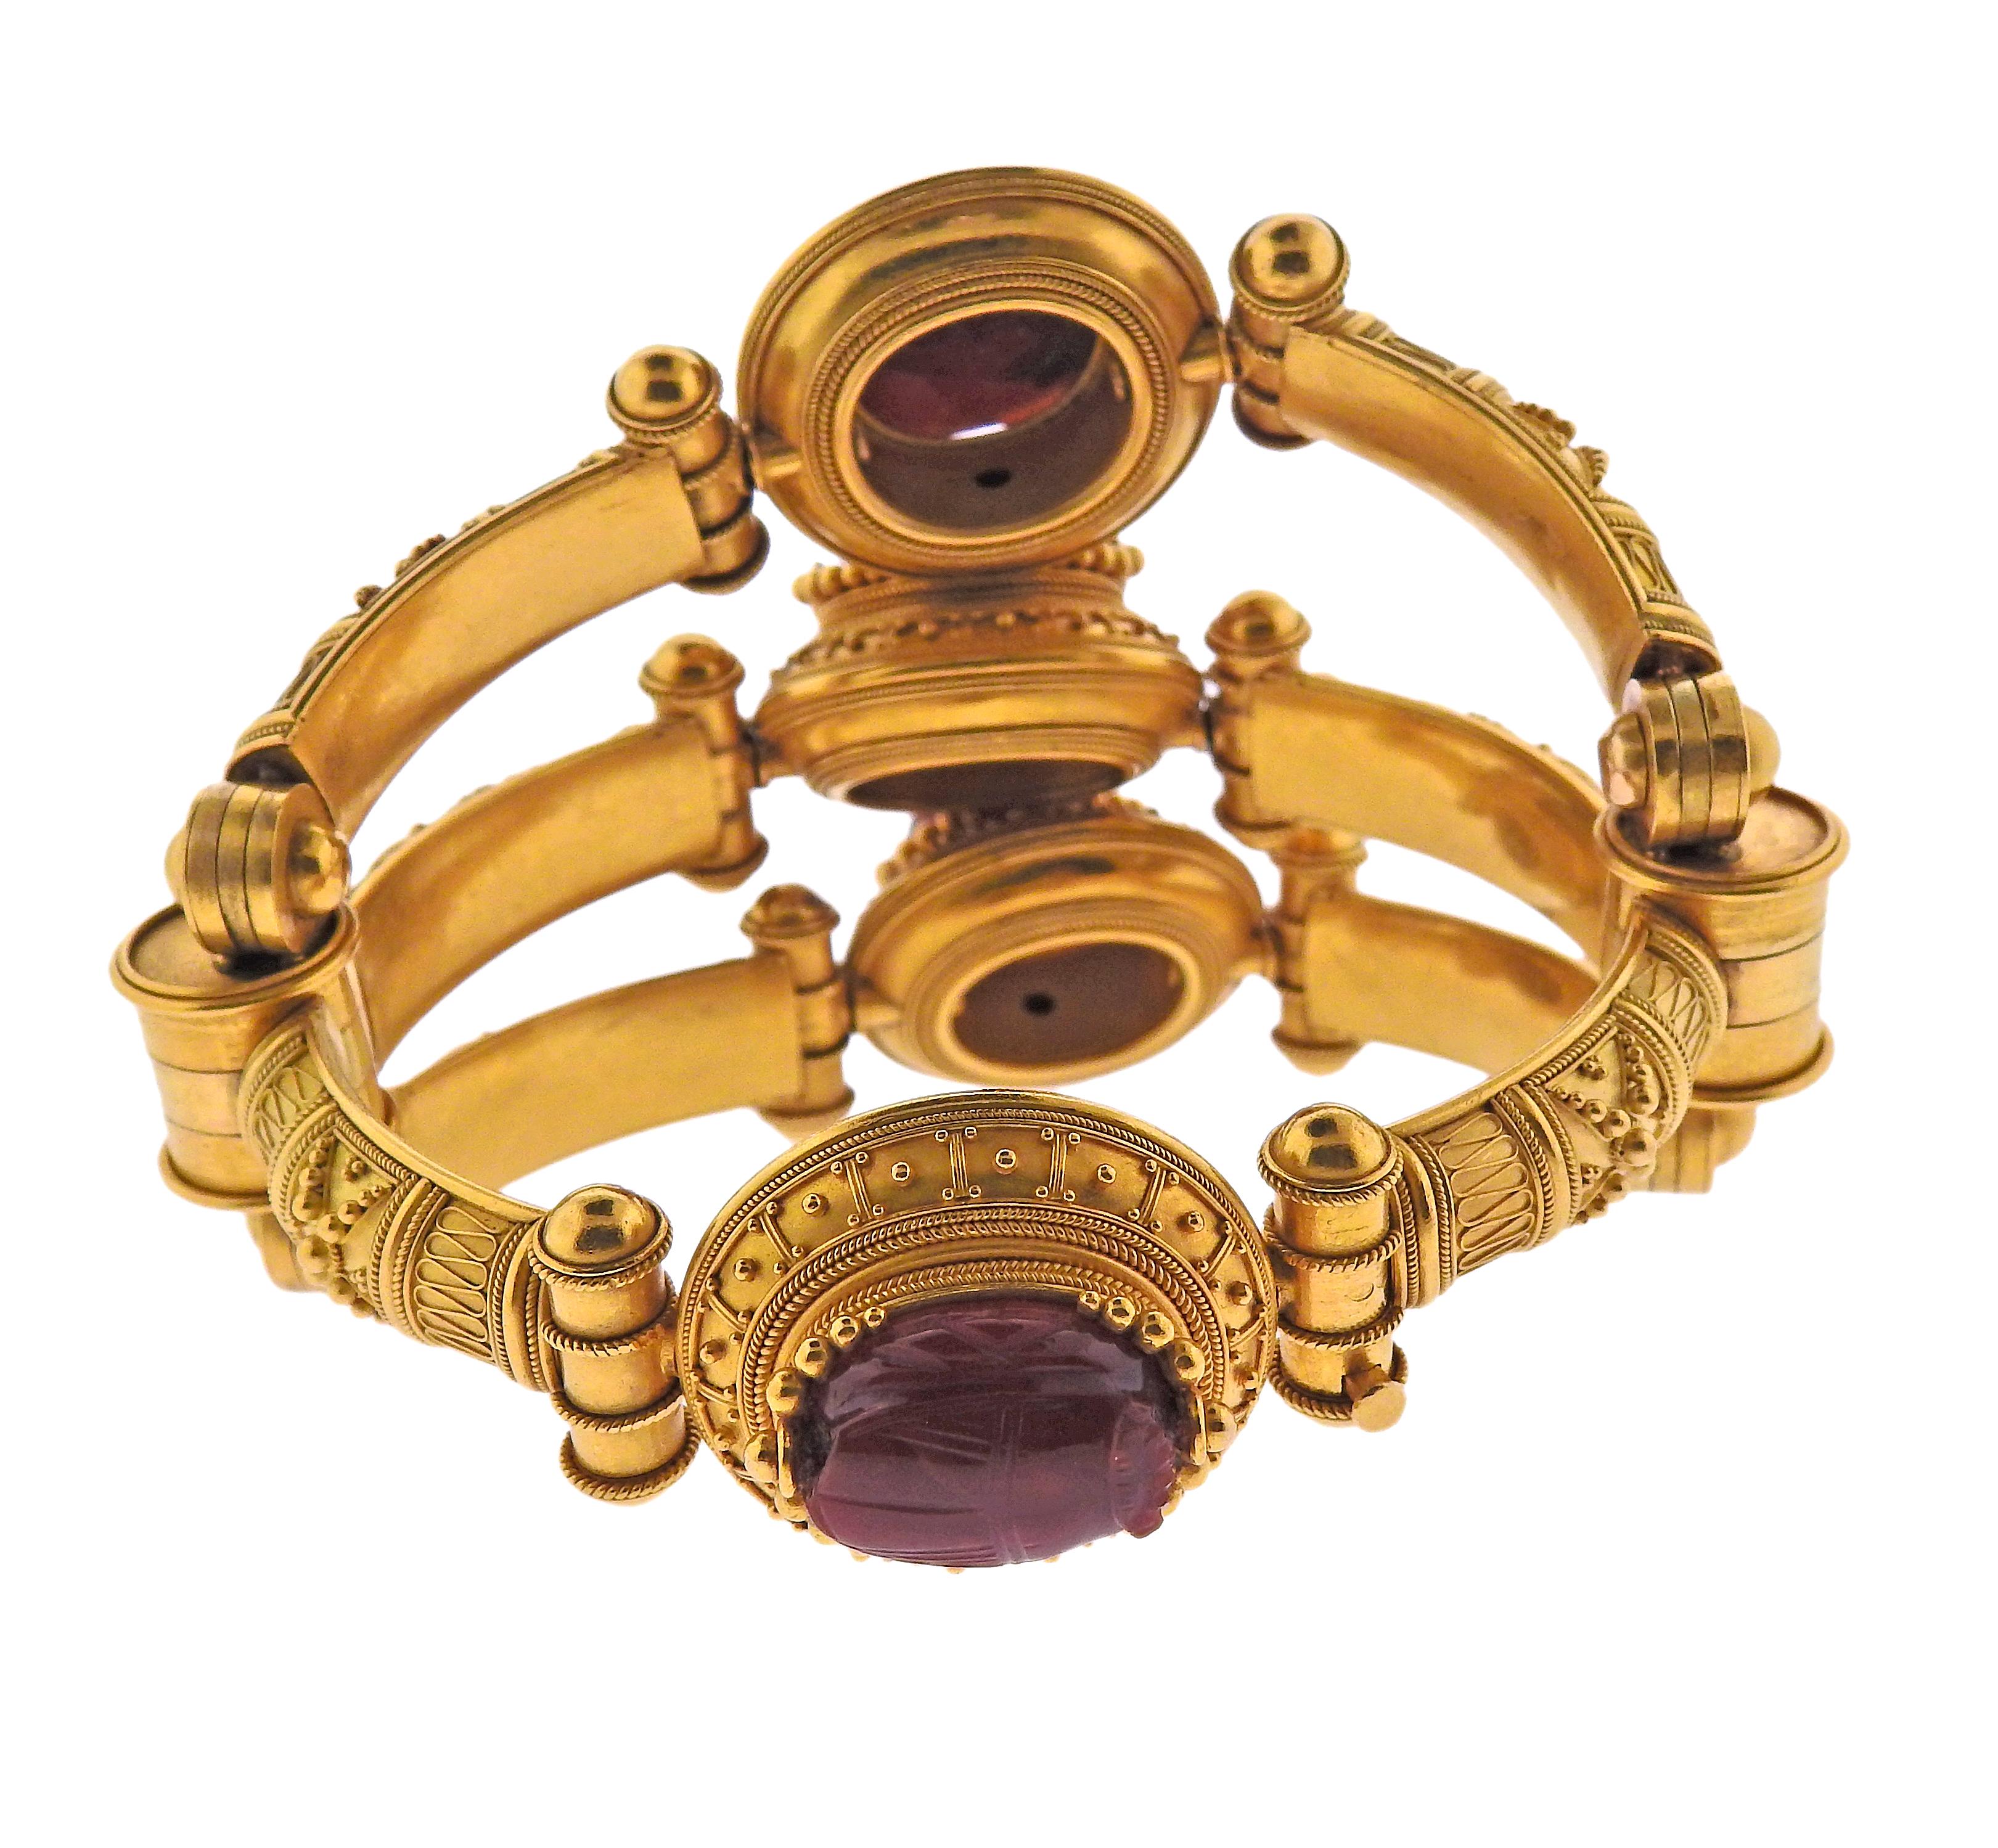 Impressive one of a kind Castellani 15k gold bracelet, with four carved scarab carnelian elements. Bracelet will fit a medium to large size wrist, approx. 7 to 8